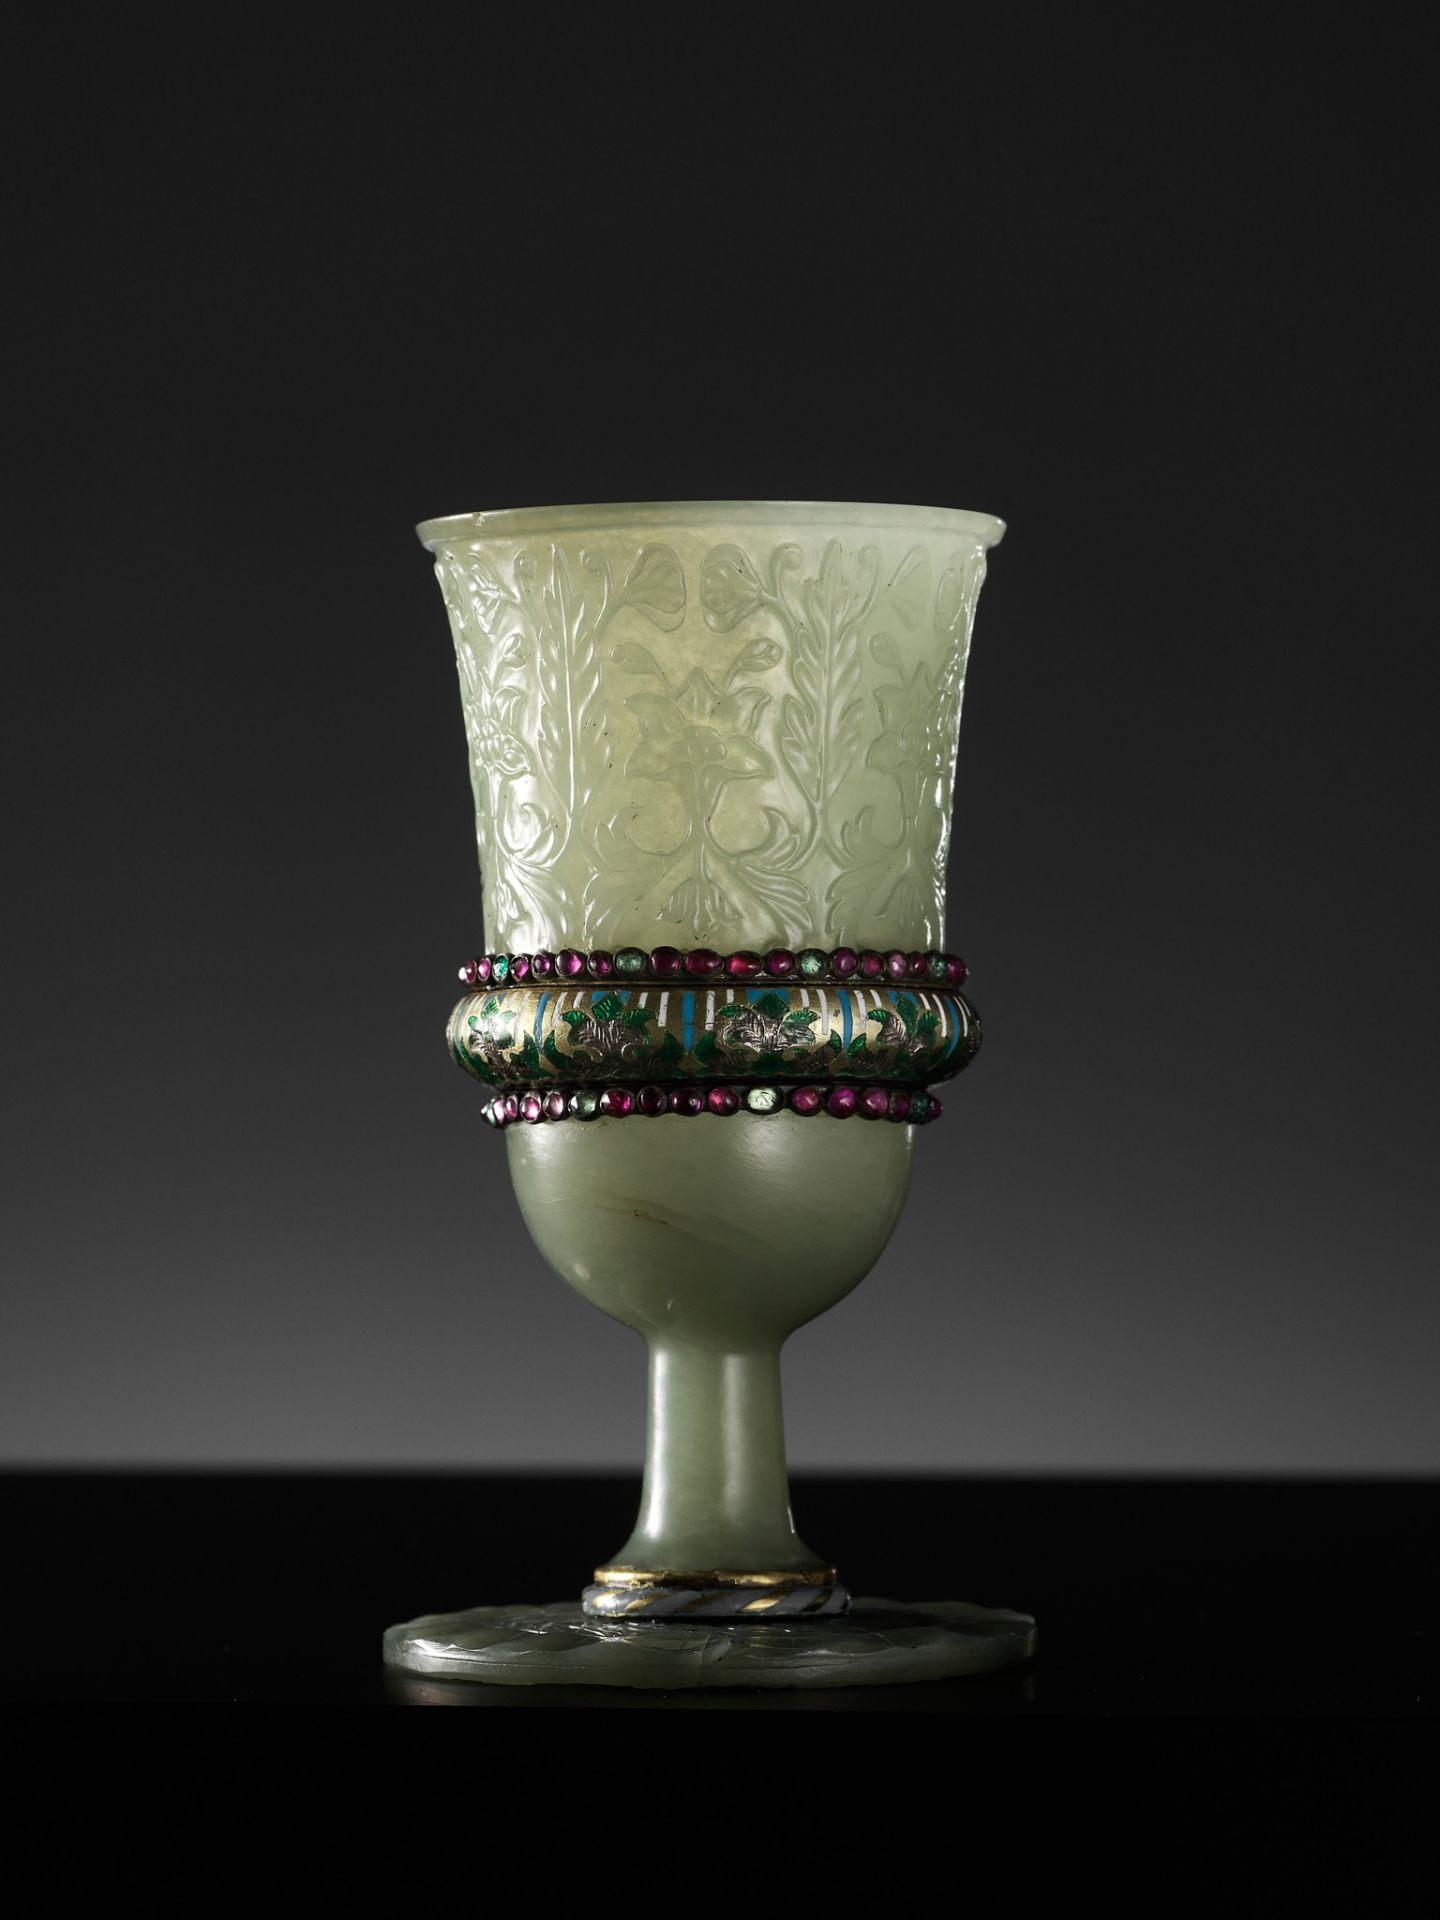 A MUGHAL GILT AND 'GEM'-INLAID JADE STEM CUP, INDIA, 18TH CENTURY - Image 6 of 11